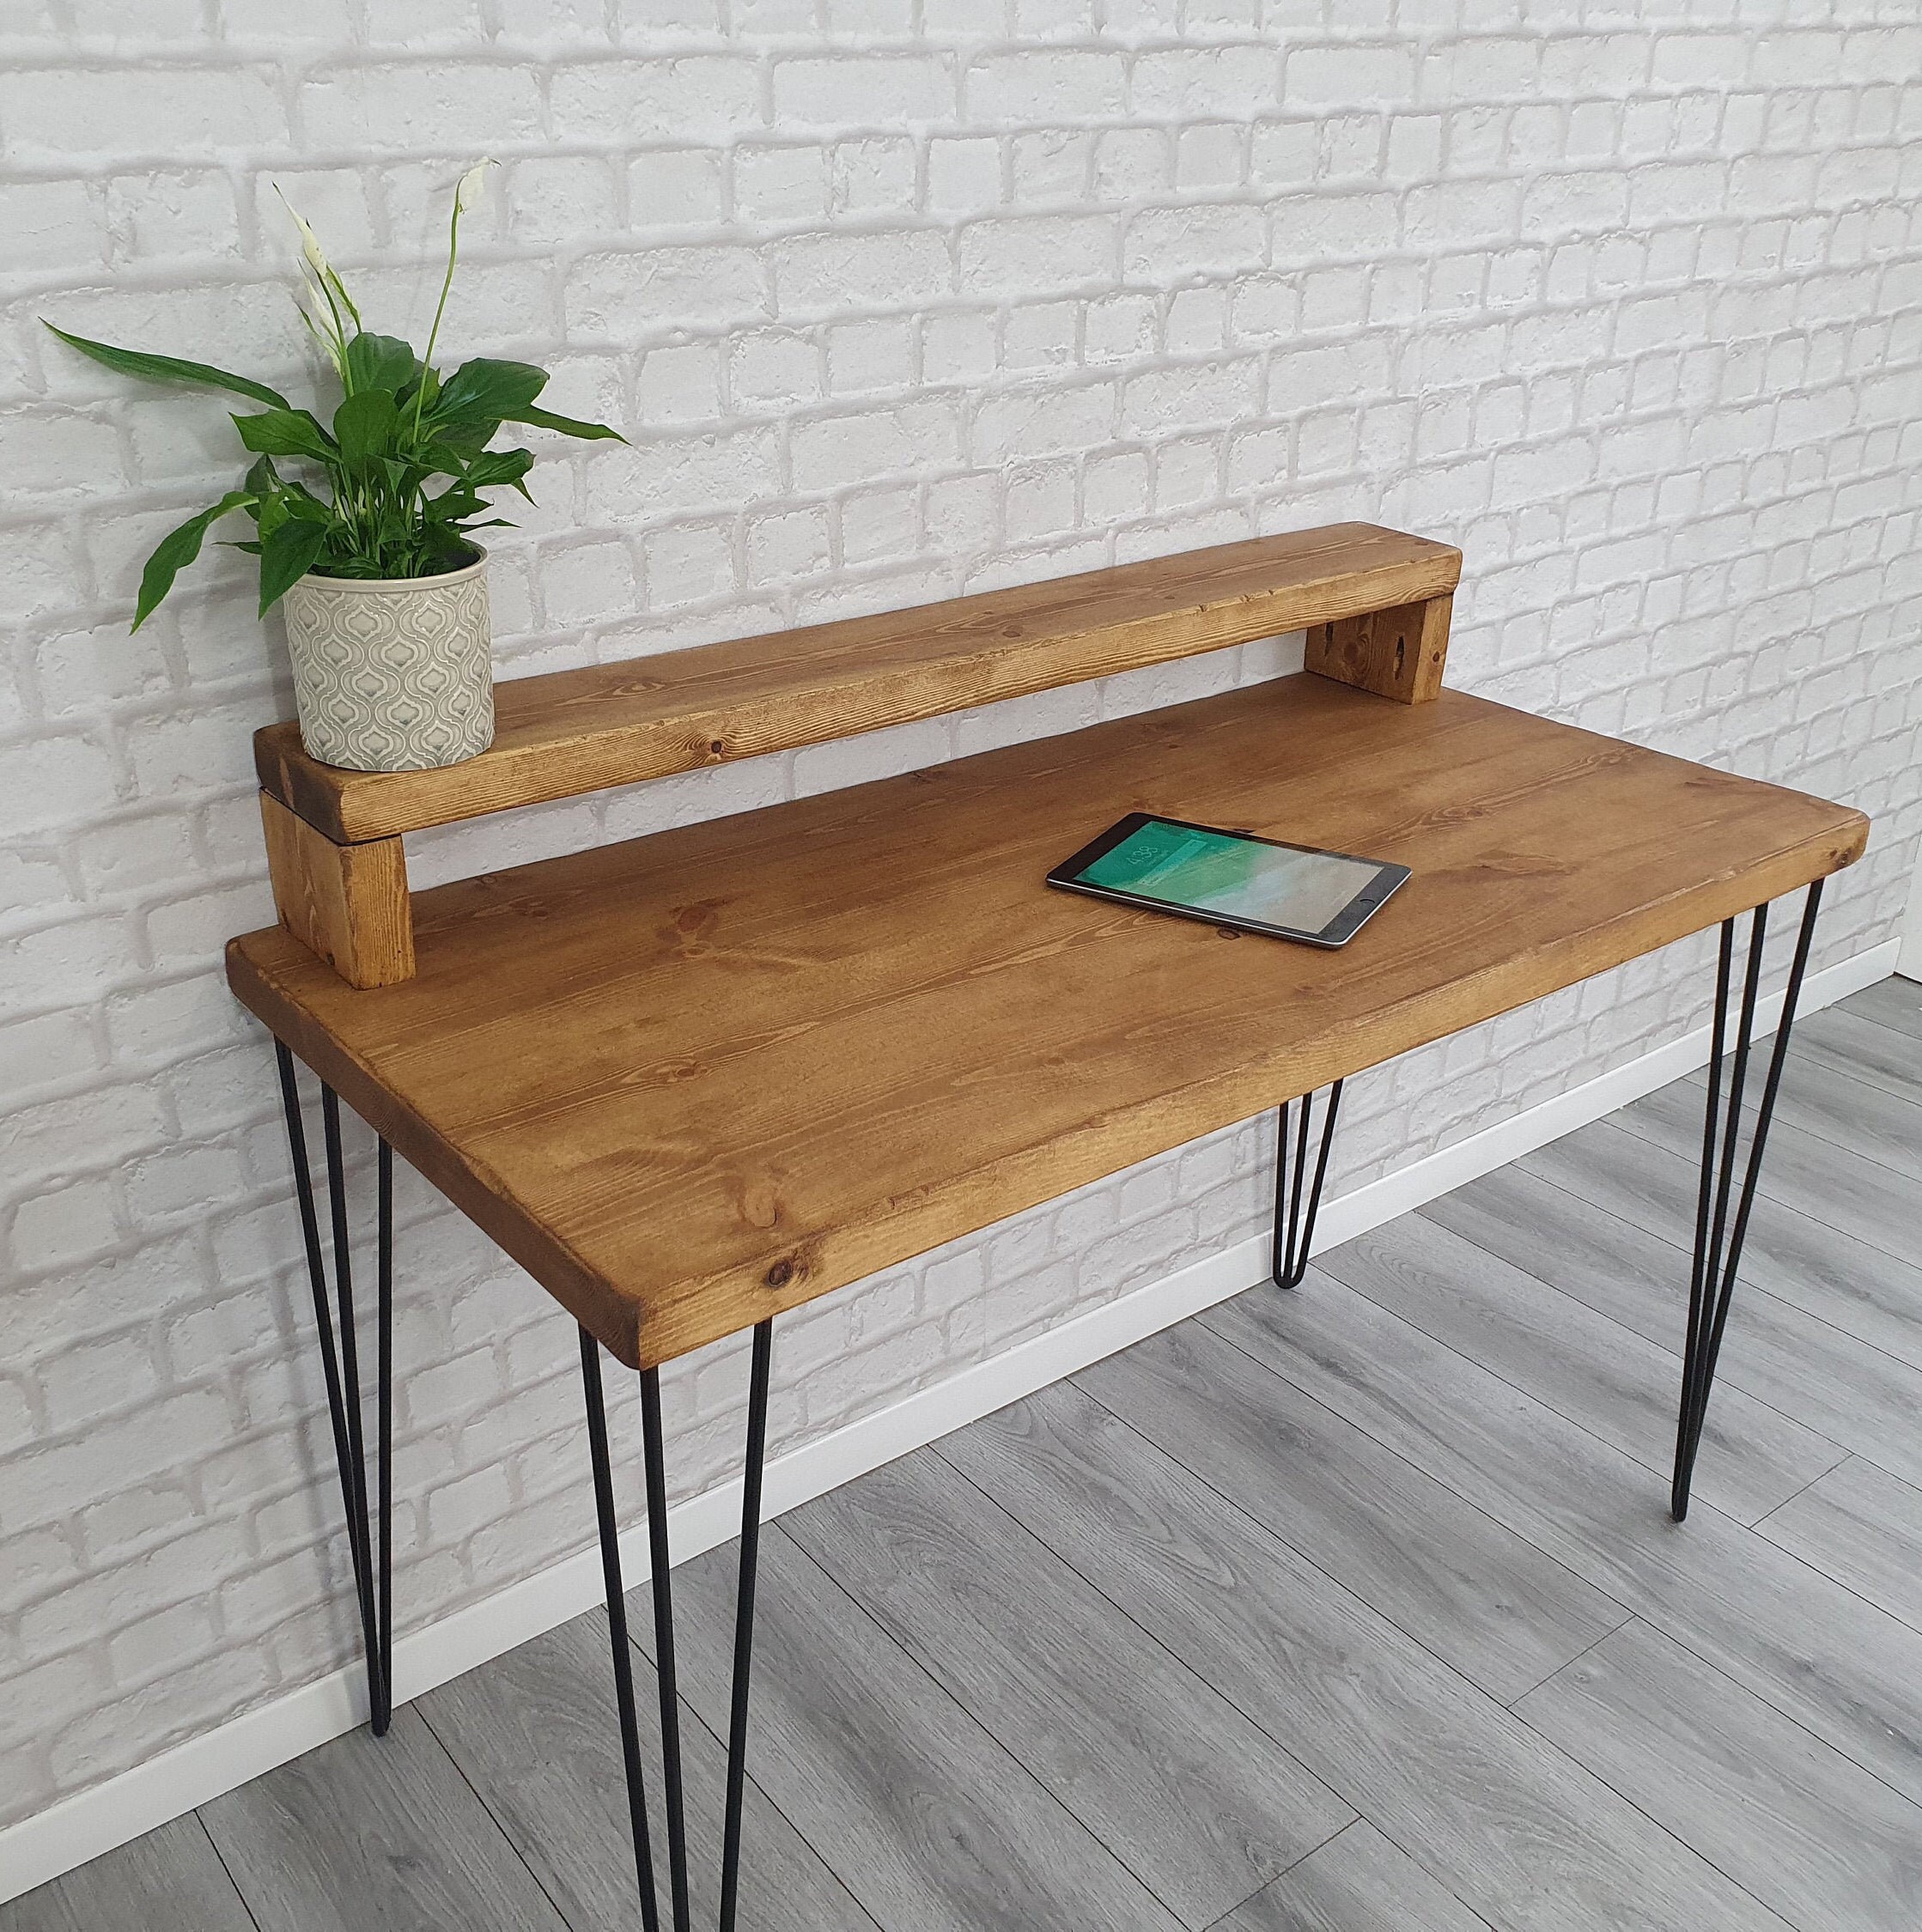 Lapboard, Lapdesk, Wooden Lap Table, Laptop Desk, Work From Home 